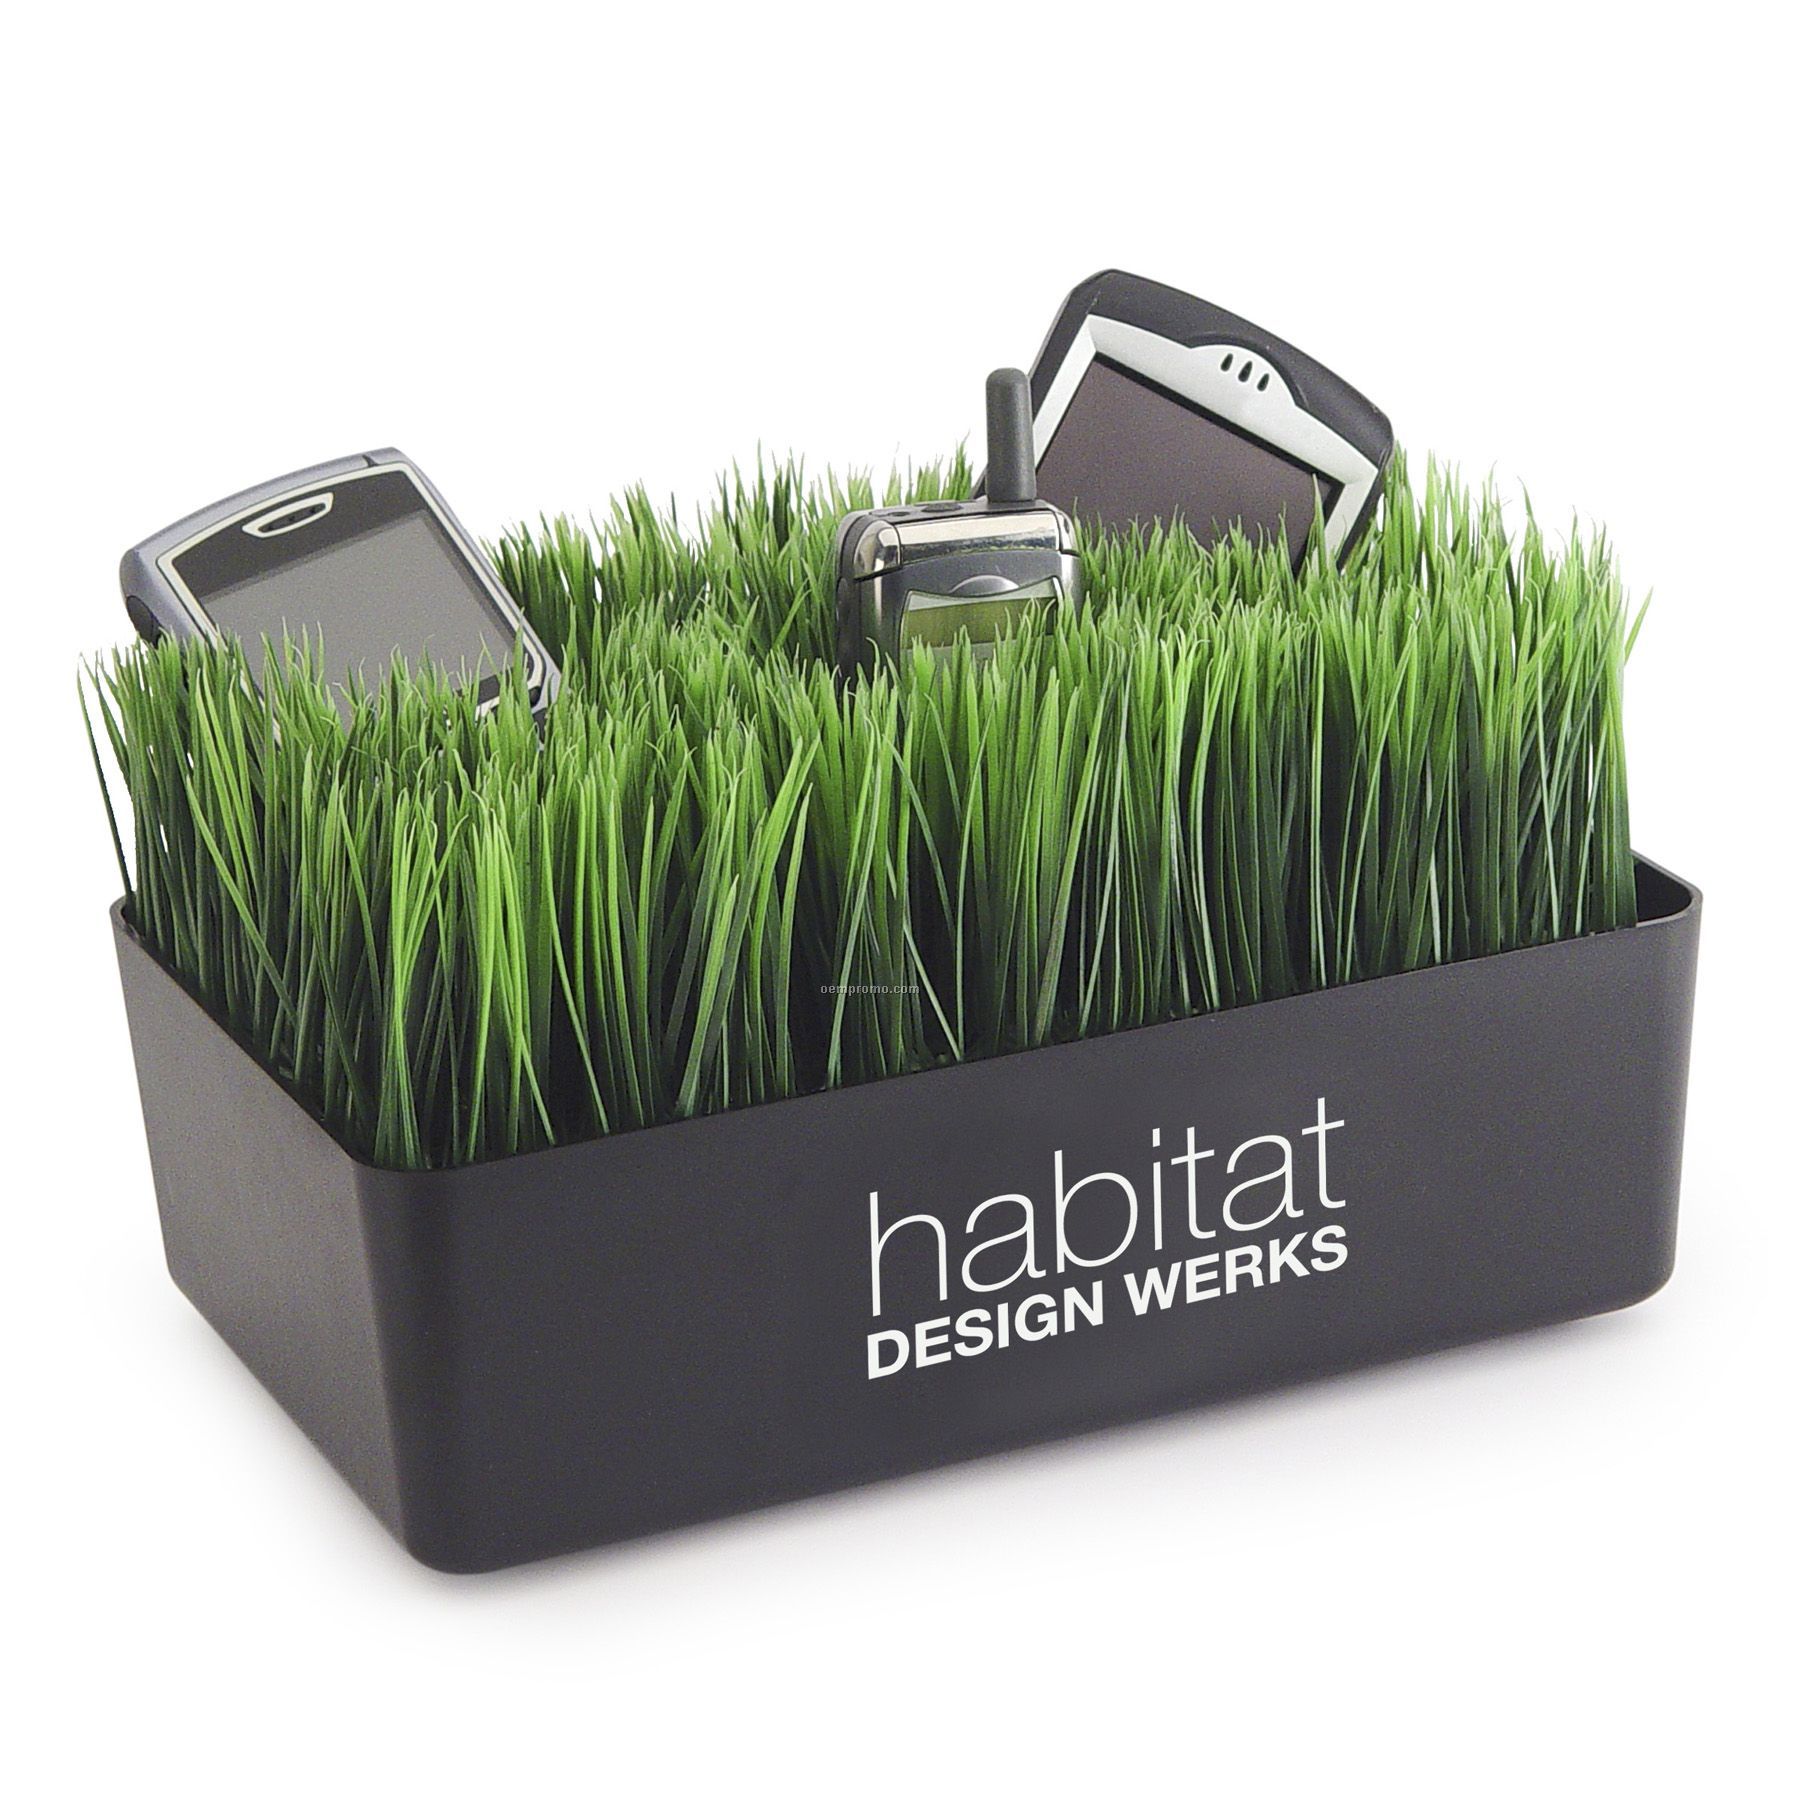 Grass Charging Station